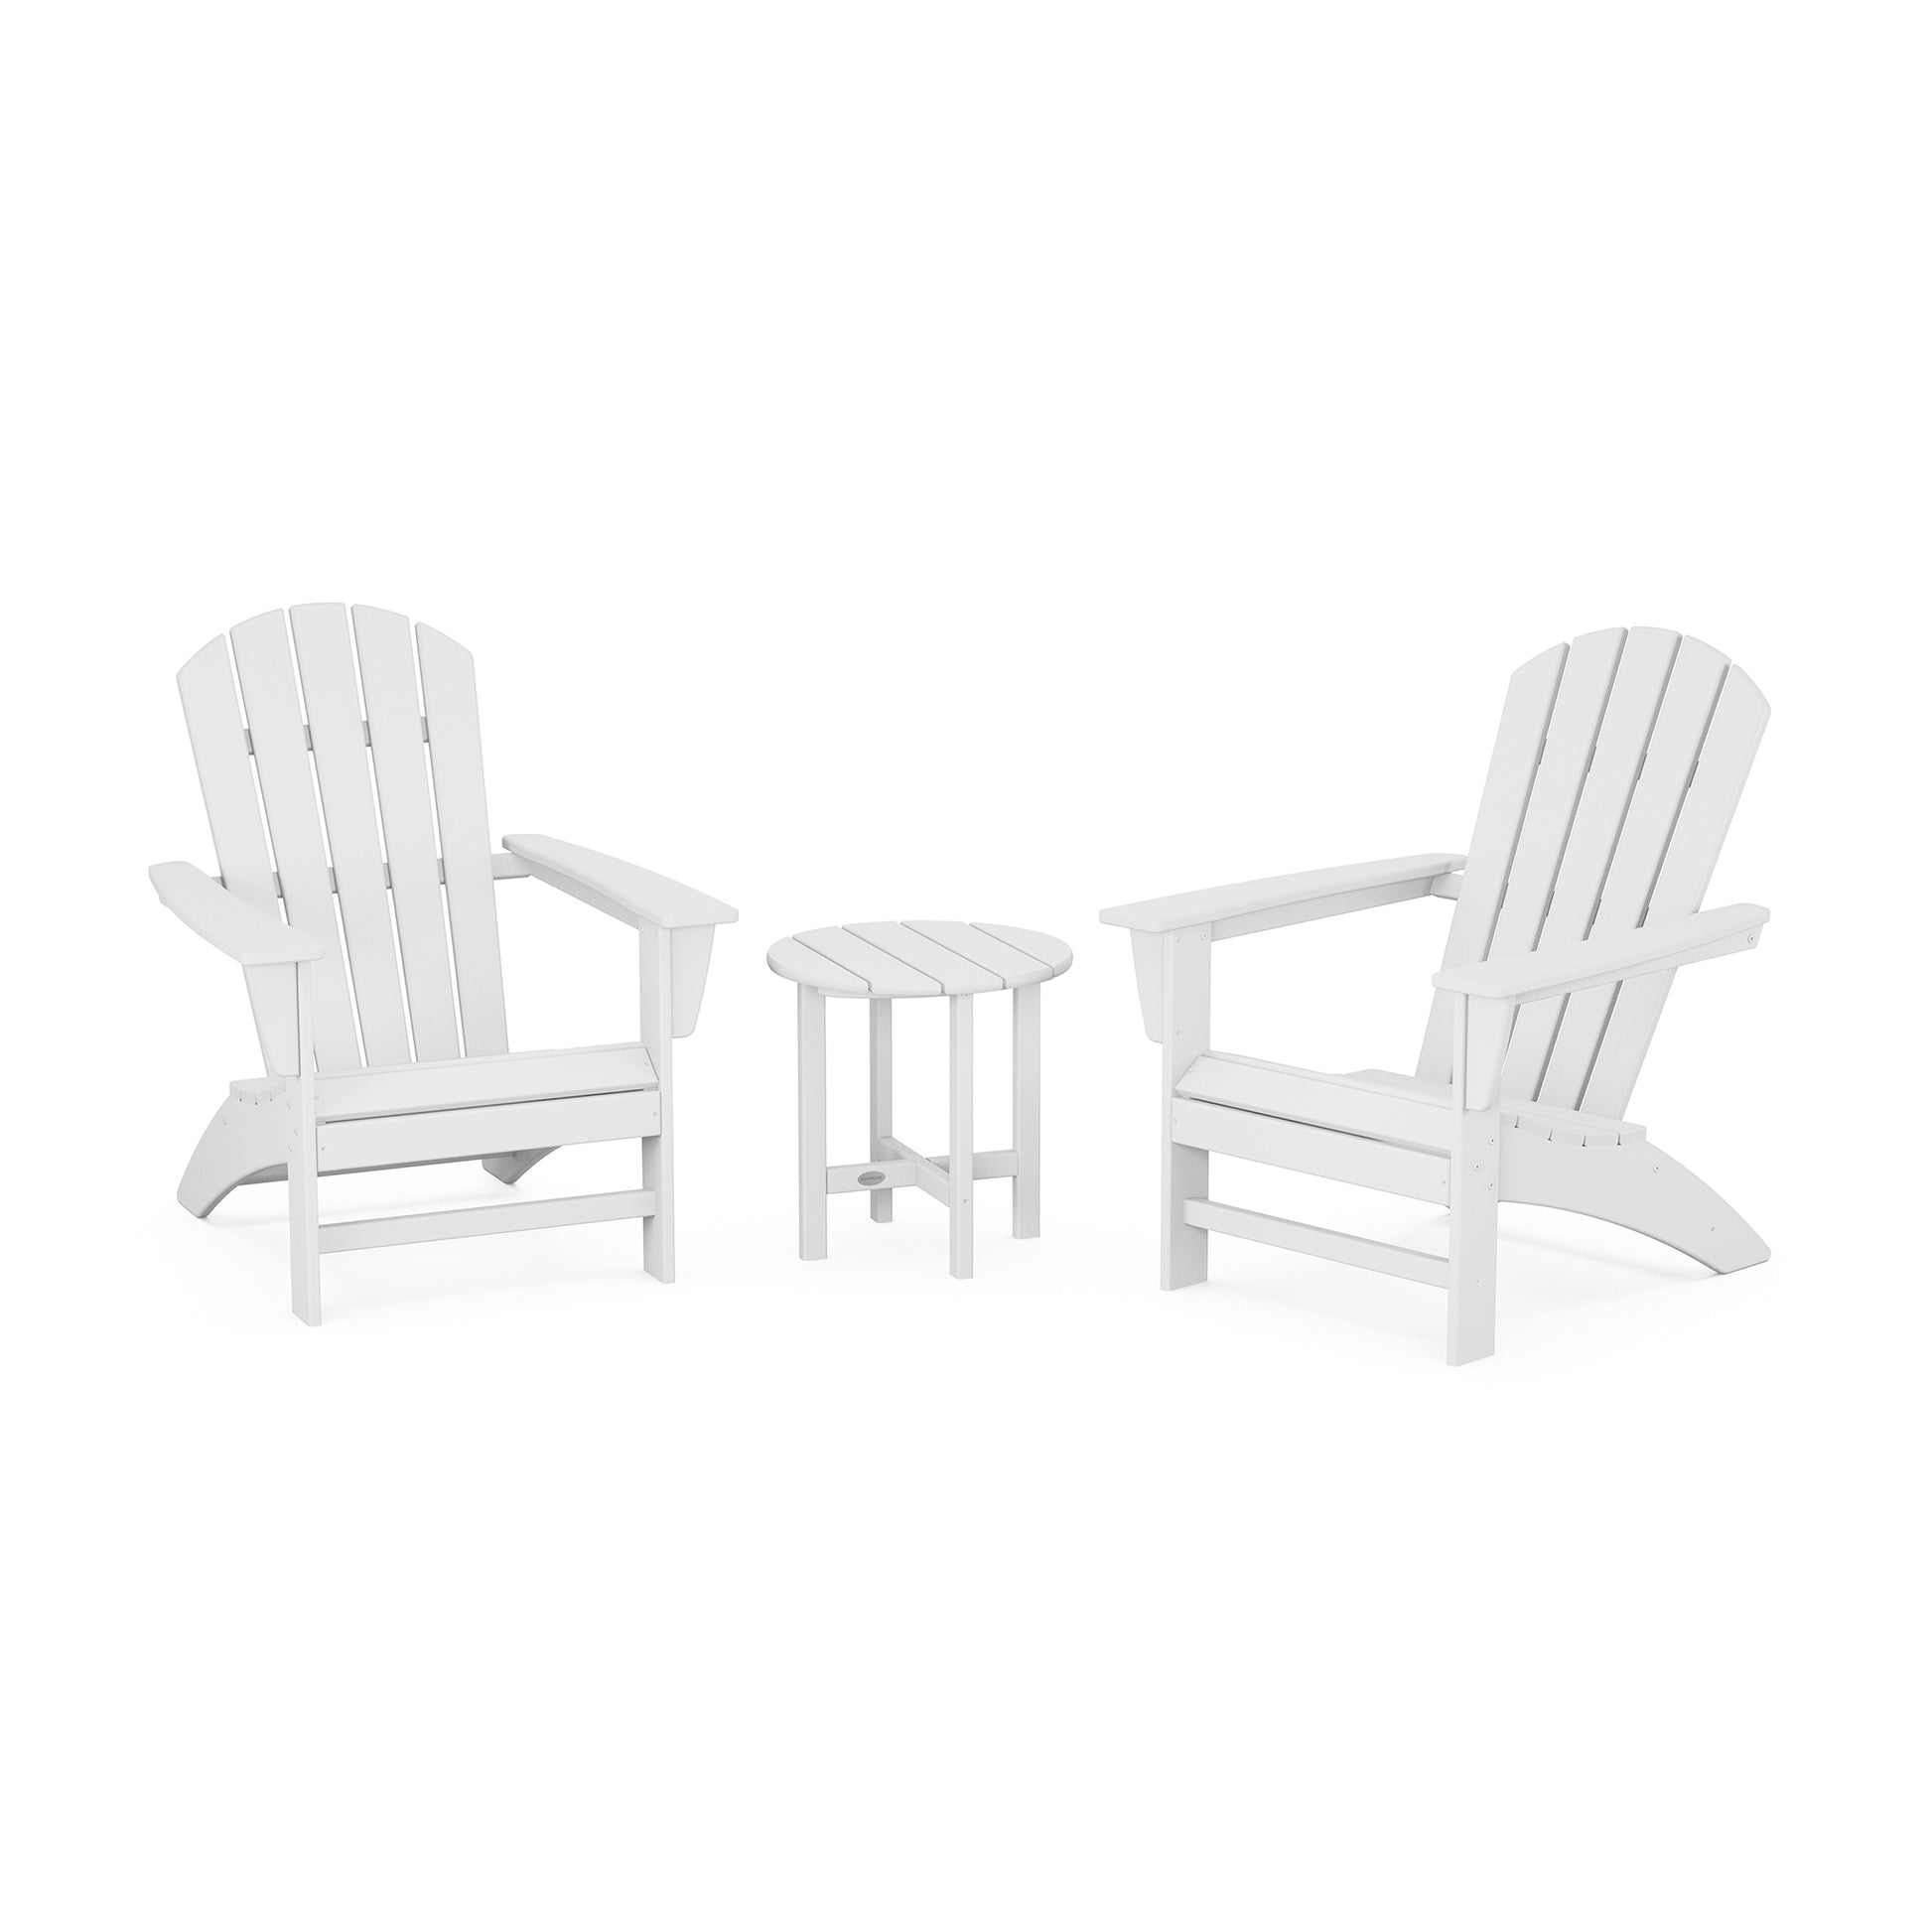 Two white POLYWOOD Nautical 3-Piece Adirondack sets facing each other with a small round table between them, all set against a plain white background.